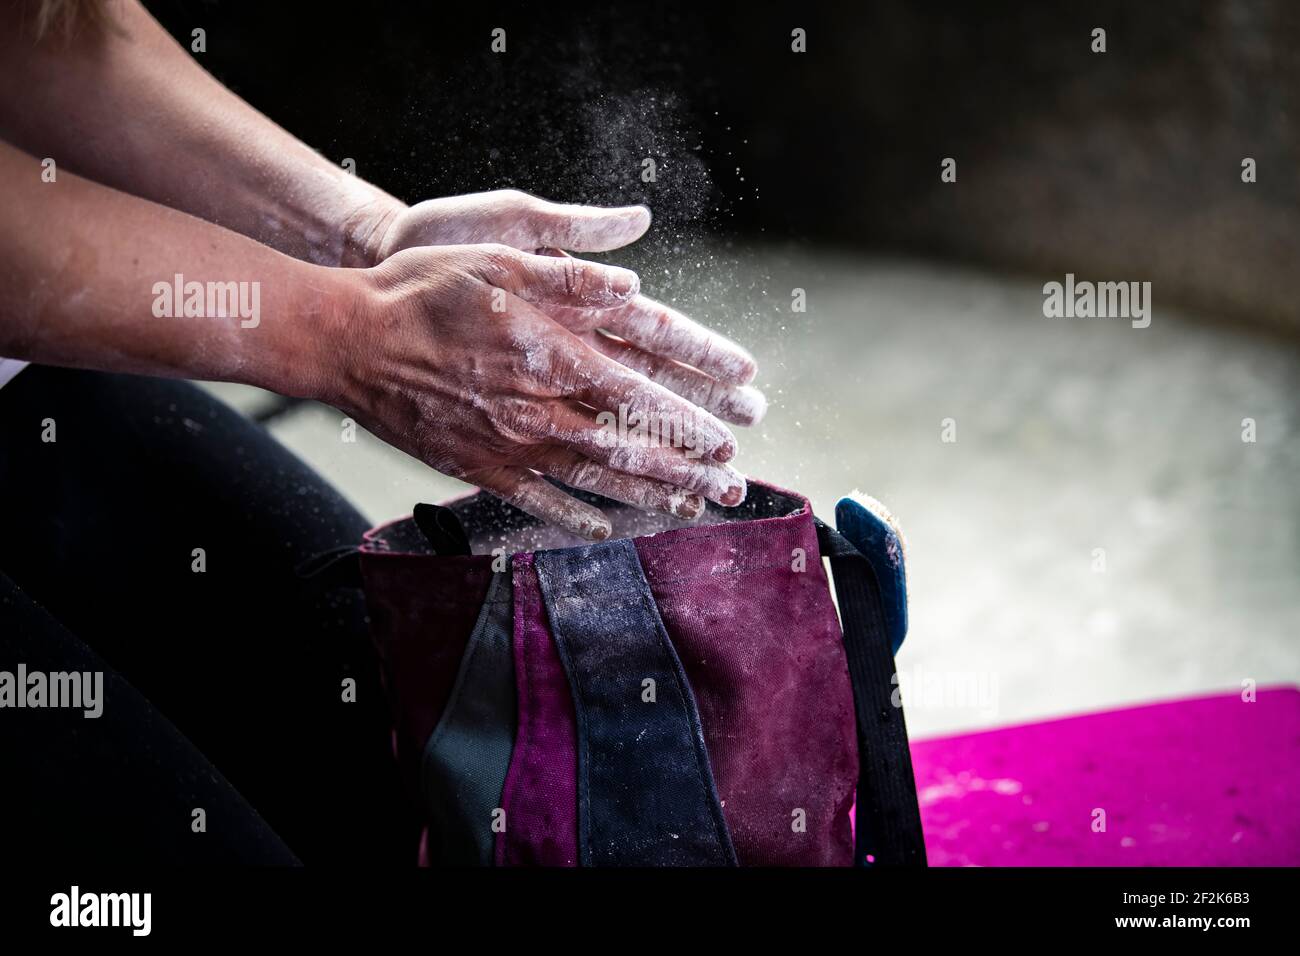 Cropped image of woman applying chalk powder on hands before bouldering Stock Photo